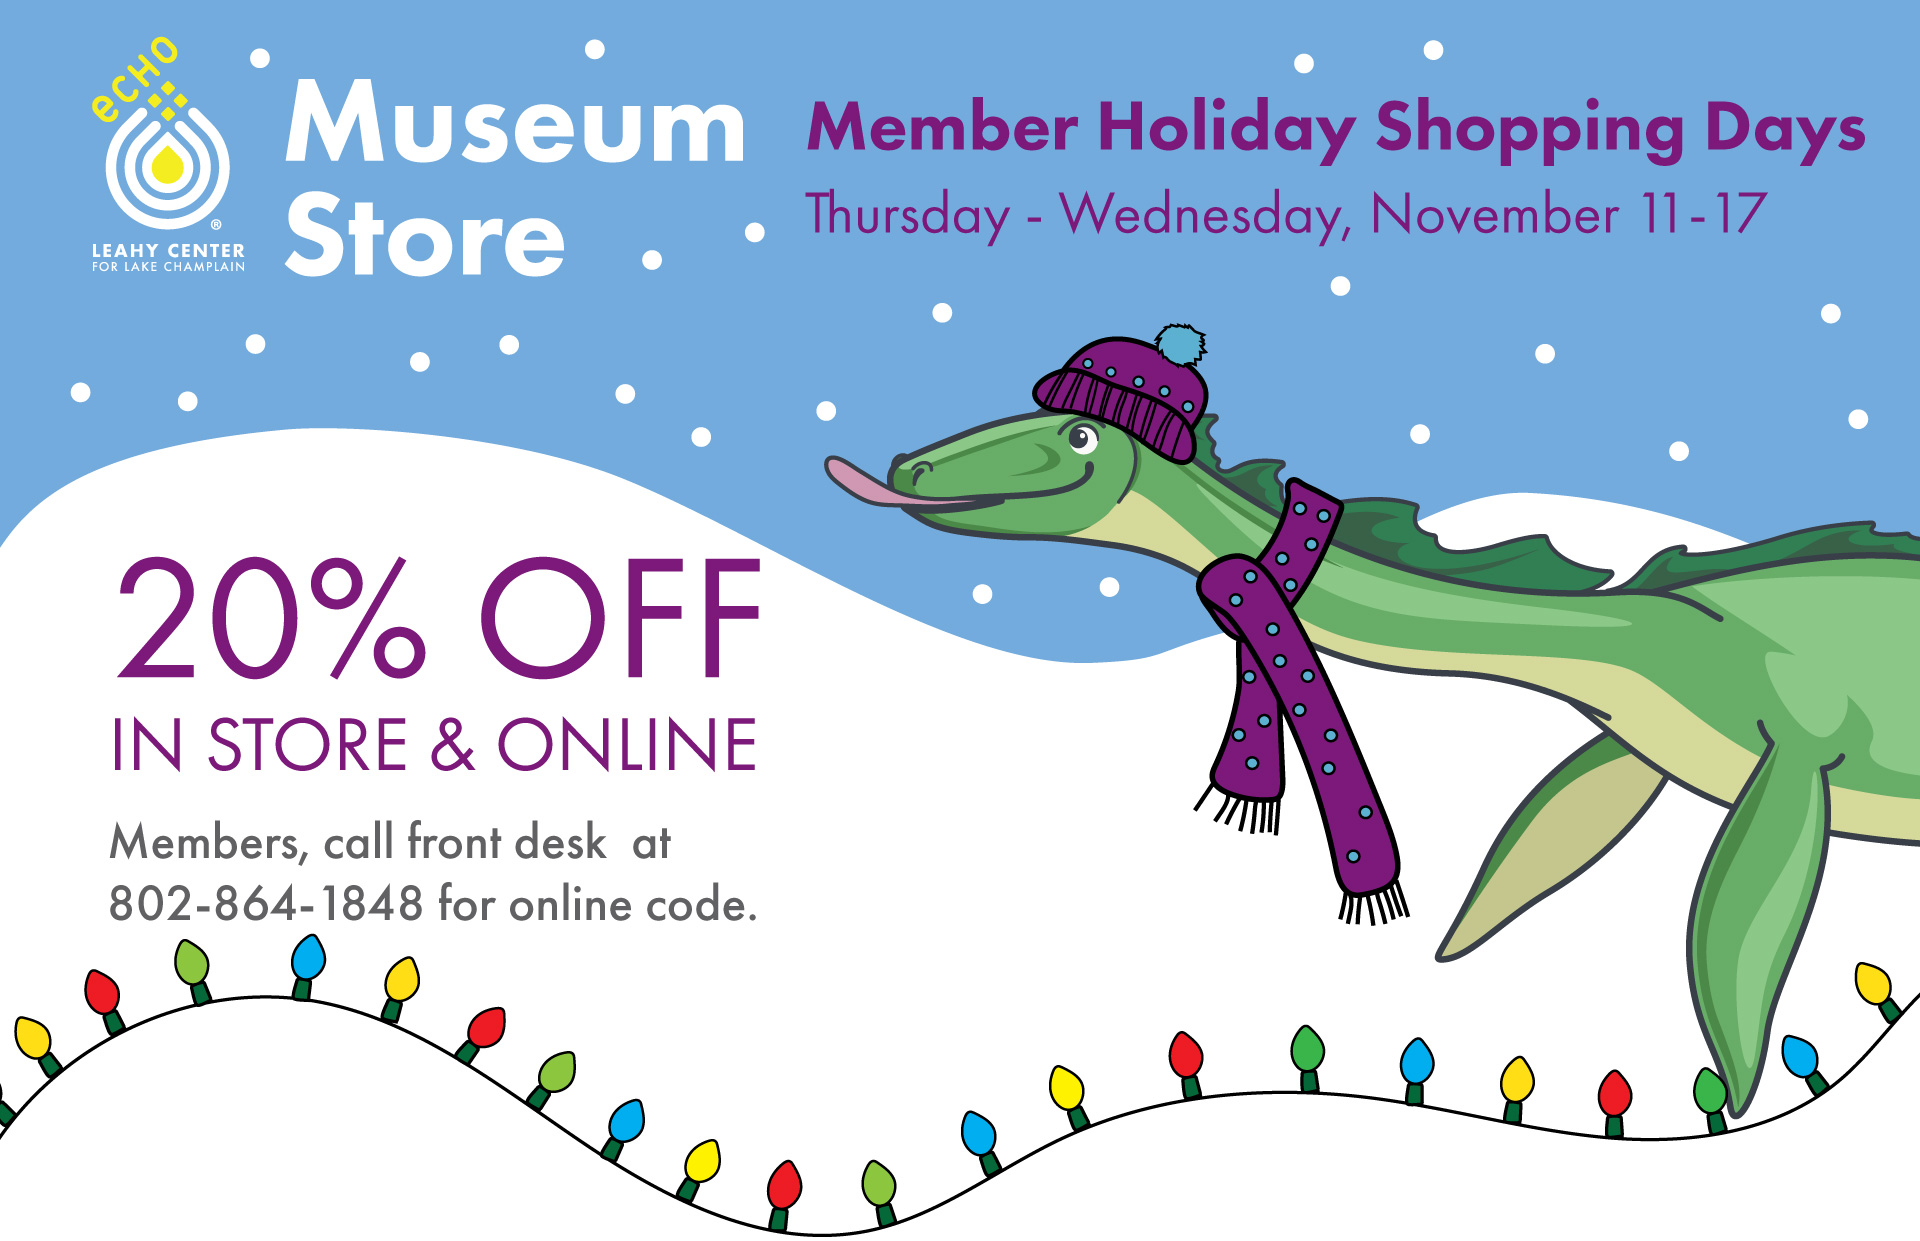 ECHO Museum Store Member Holiday Shopping Days, 20% off in store and online. Image of Champ in a winter hat trying to lick snow and holiday lights.